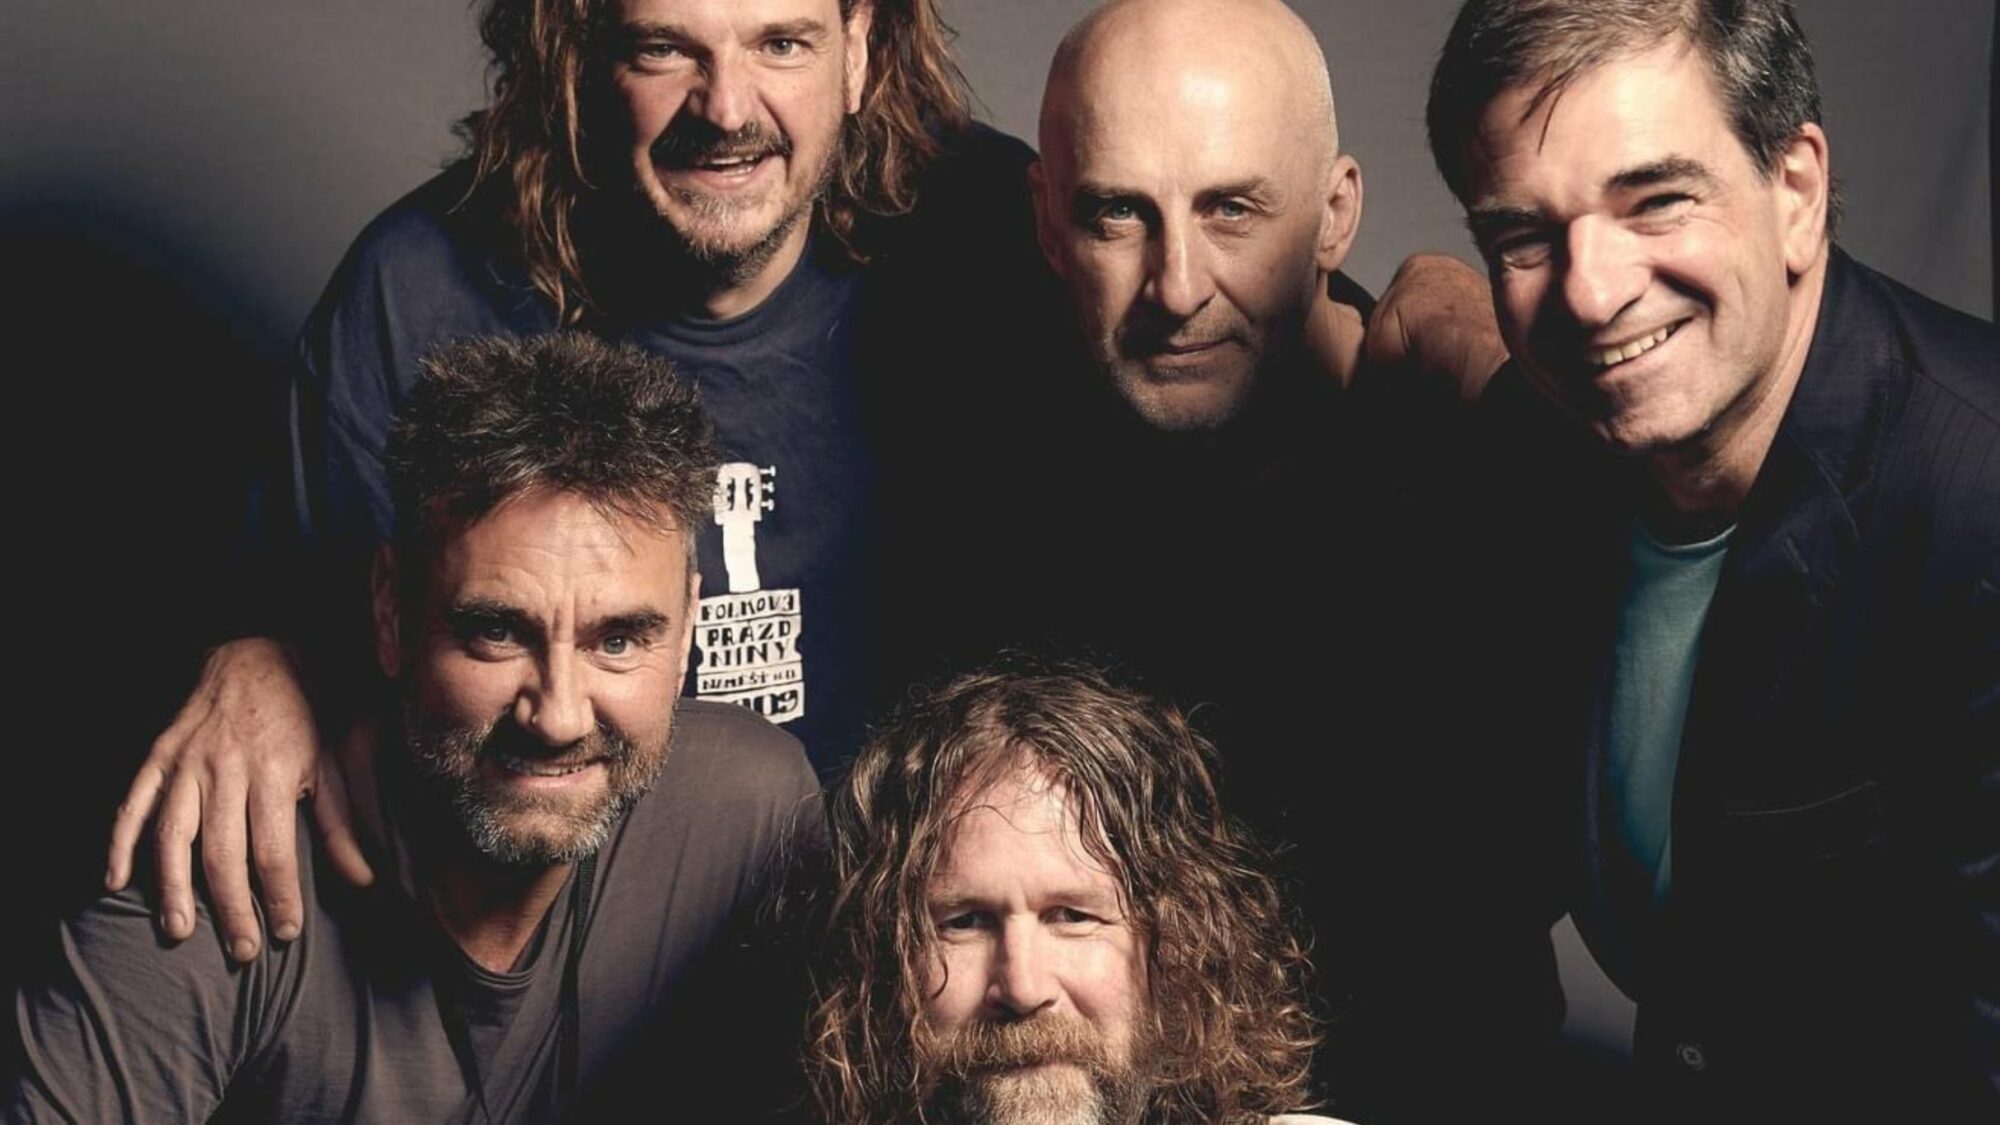 Hothouse Flowers: The Let’s Do This Thing Tour at Scarborough Spa Grand Hall, Scarborough